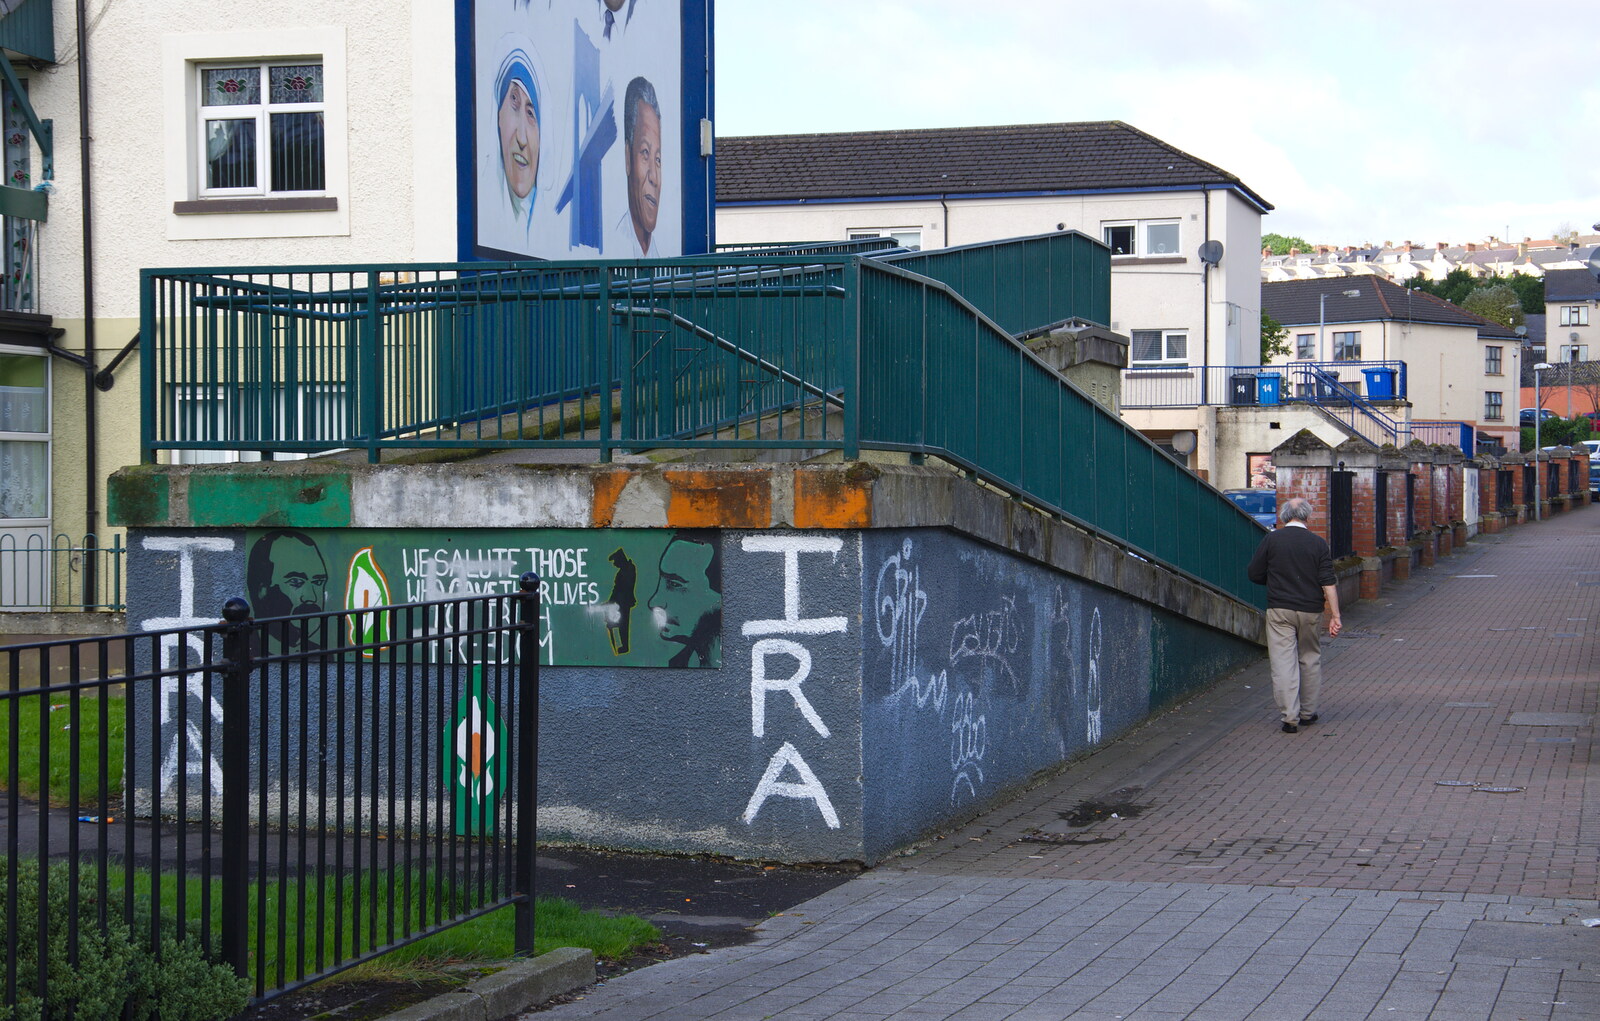 Some IRA graffiti from A Day in Derry, County Londonderry, Northern Ireland - 15th August 2019